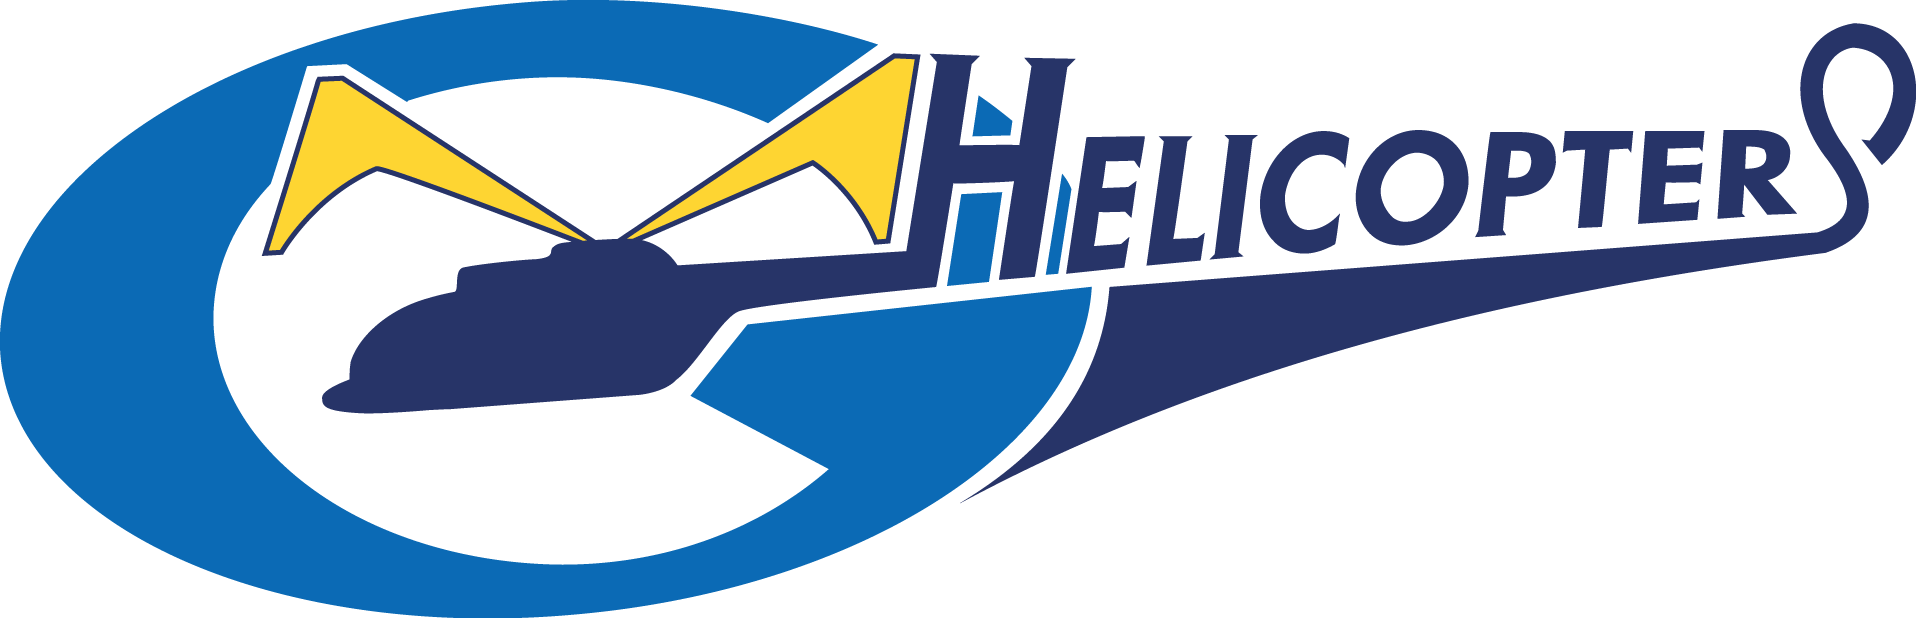 GM Helicopters (Unverified) logo